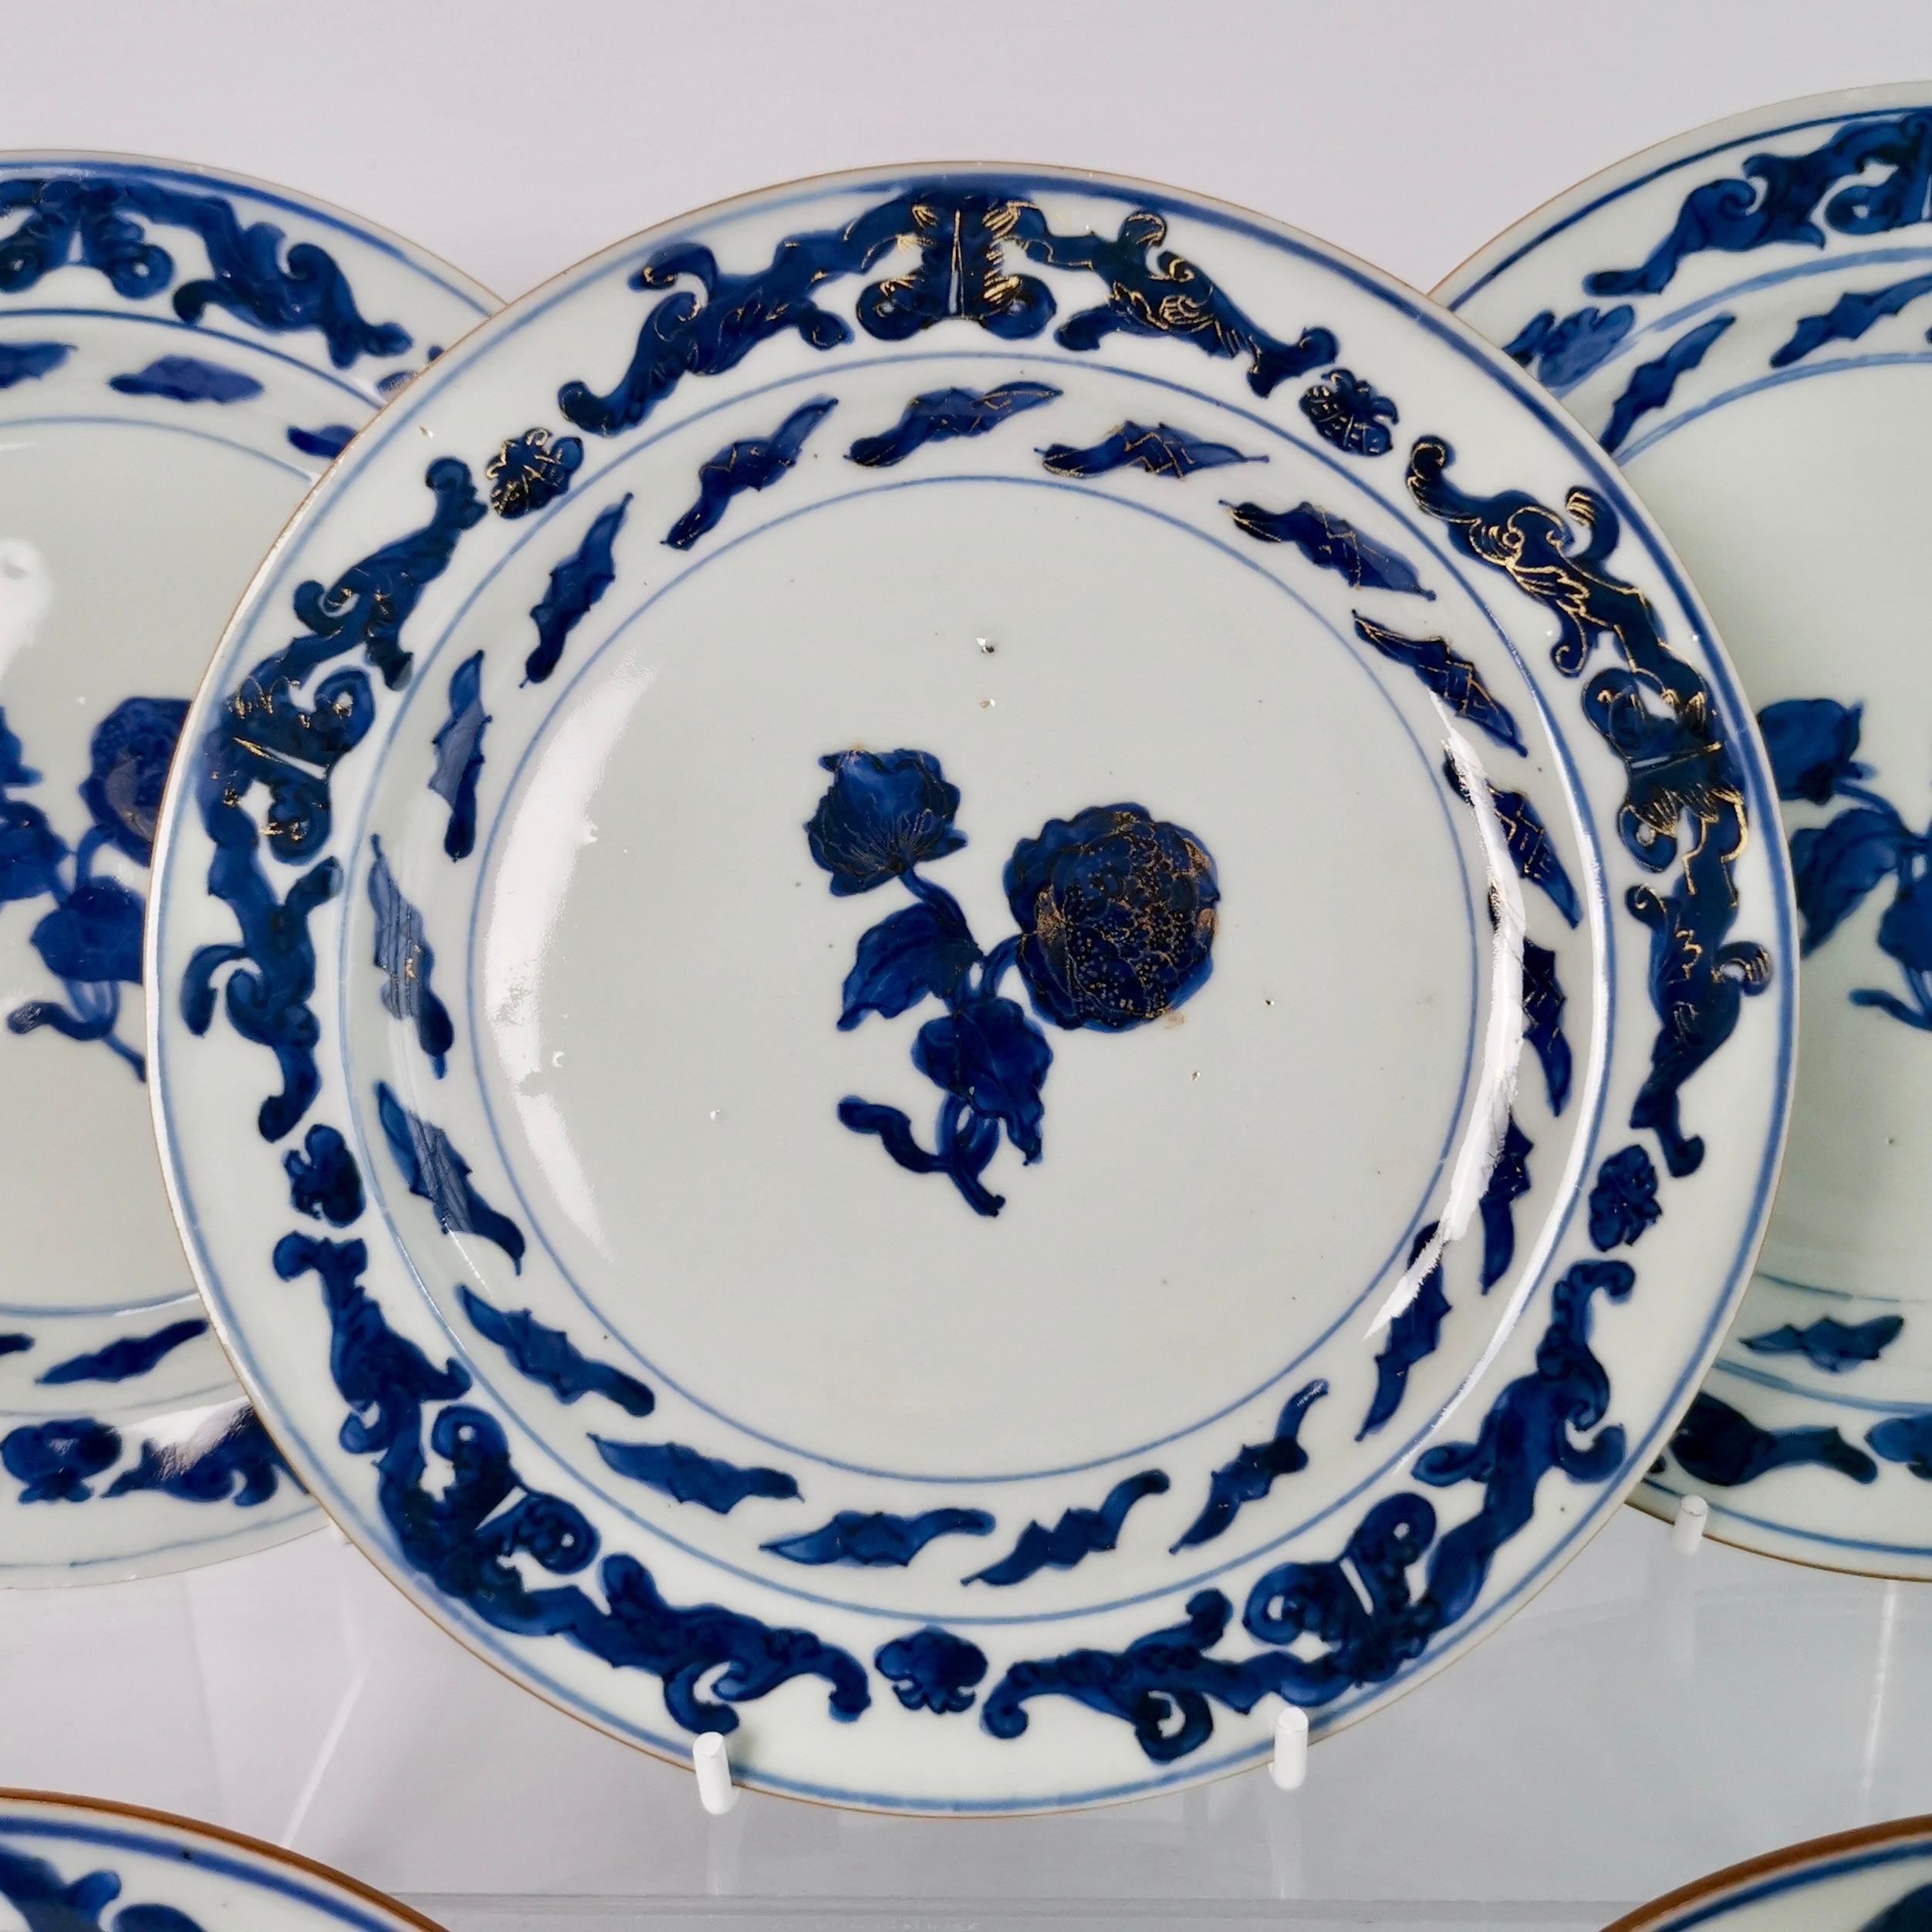 Hand-Painted Set of 6 Chinese Export Plates, Roses Blue and White, Qianlong, circa 1780